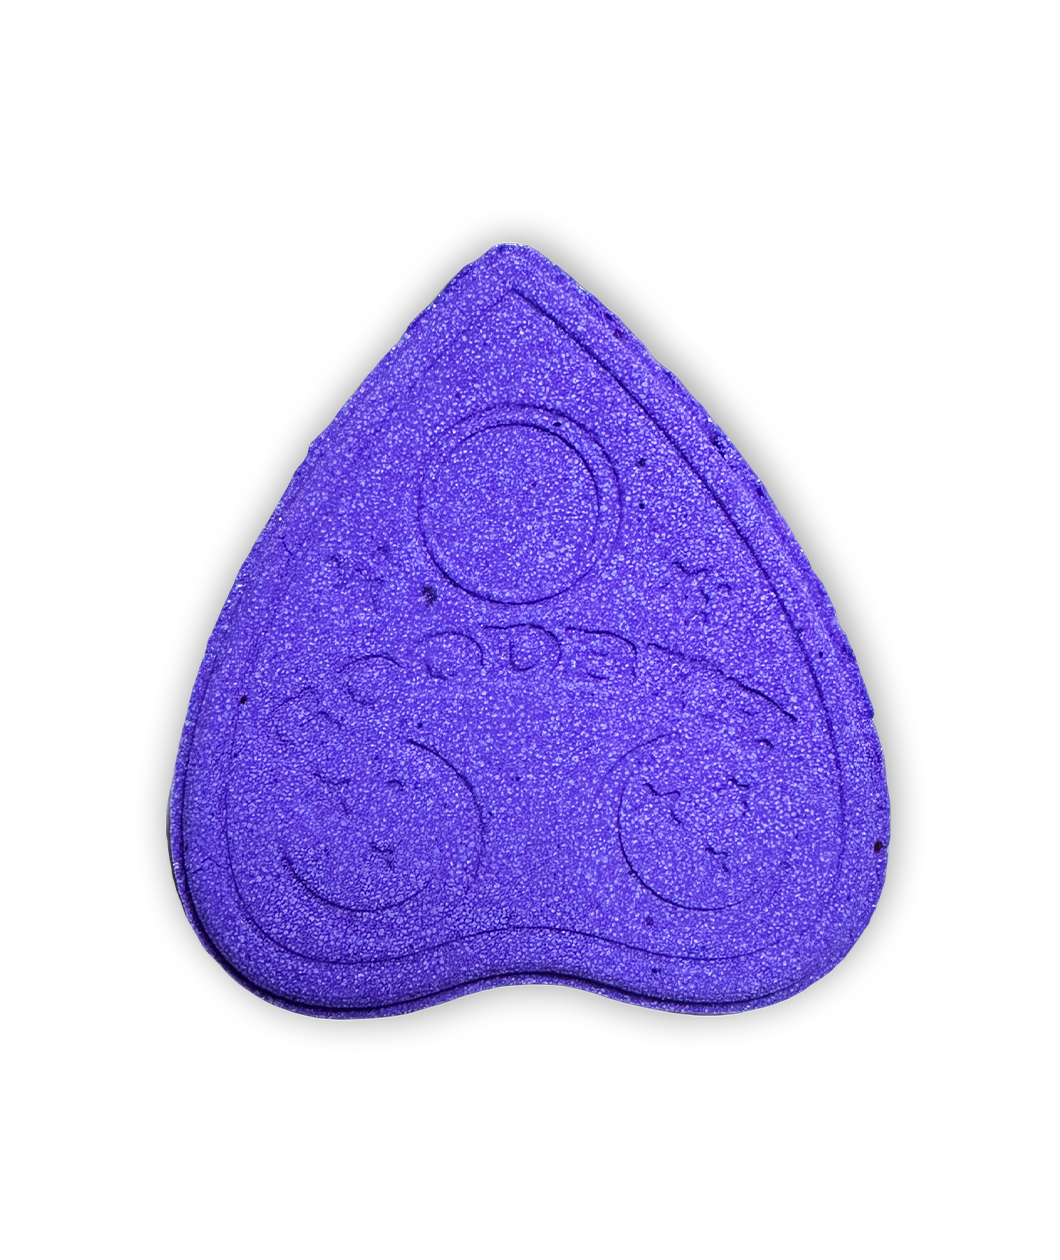 A purple bath bath bomb shaped like an upside down heart with indentations of shapes. From Spirits.